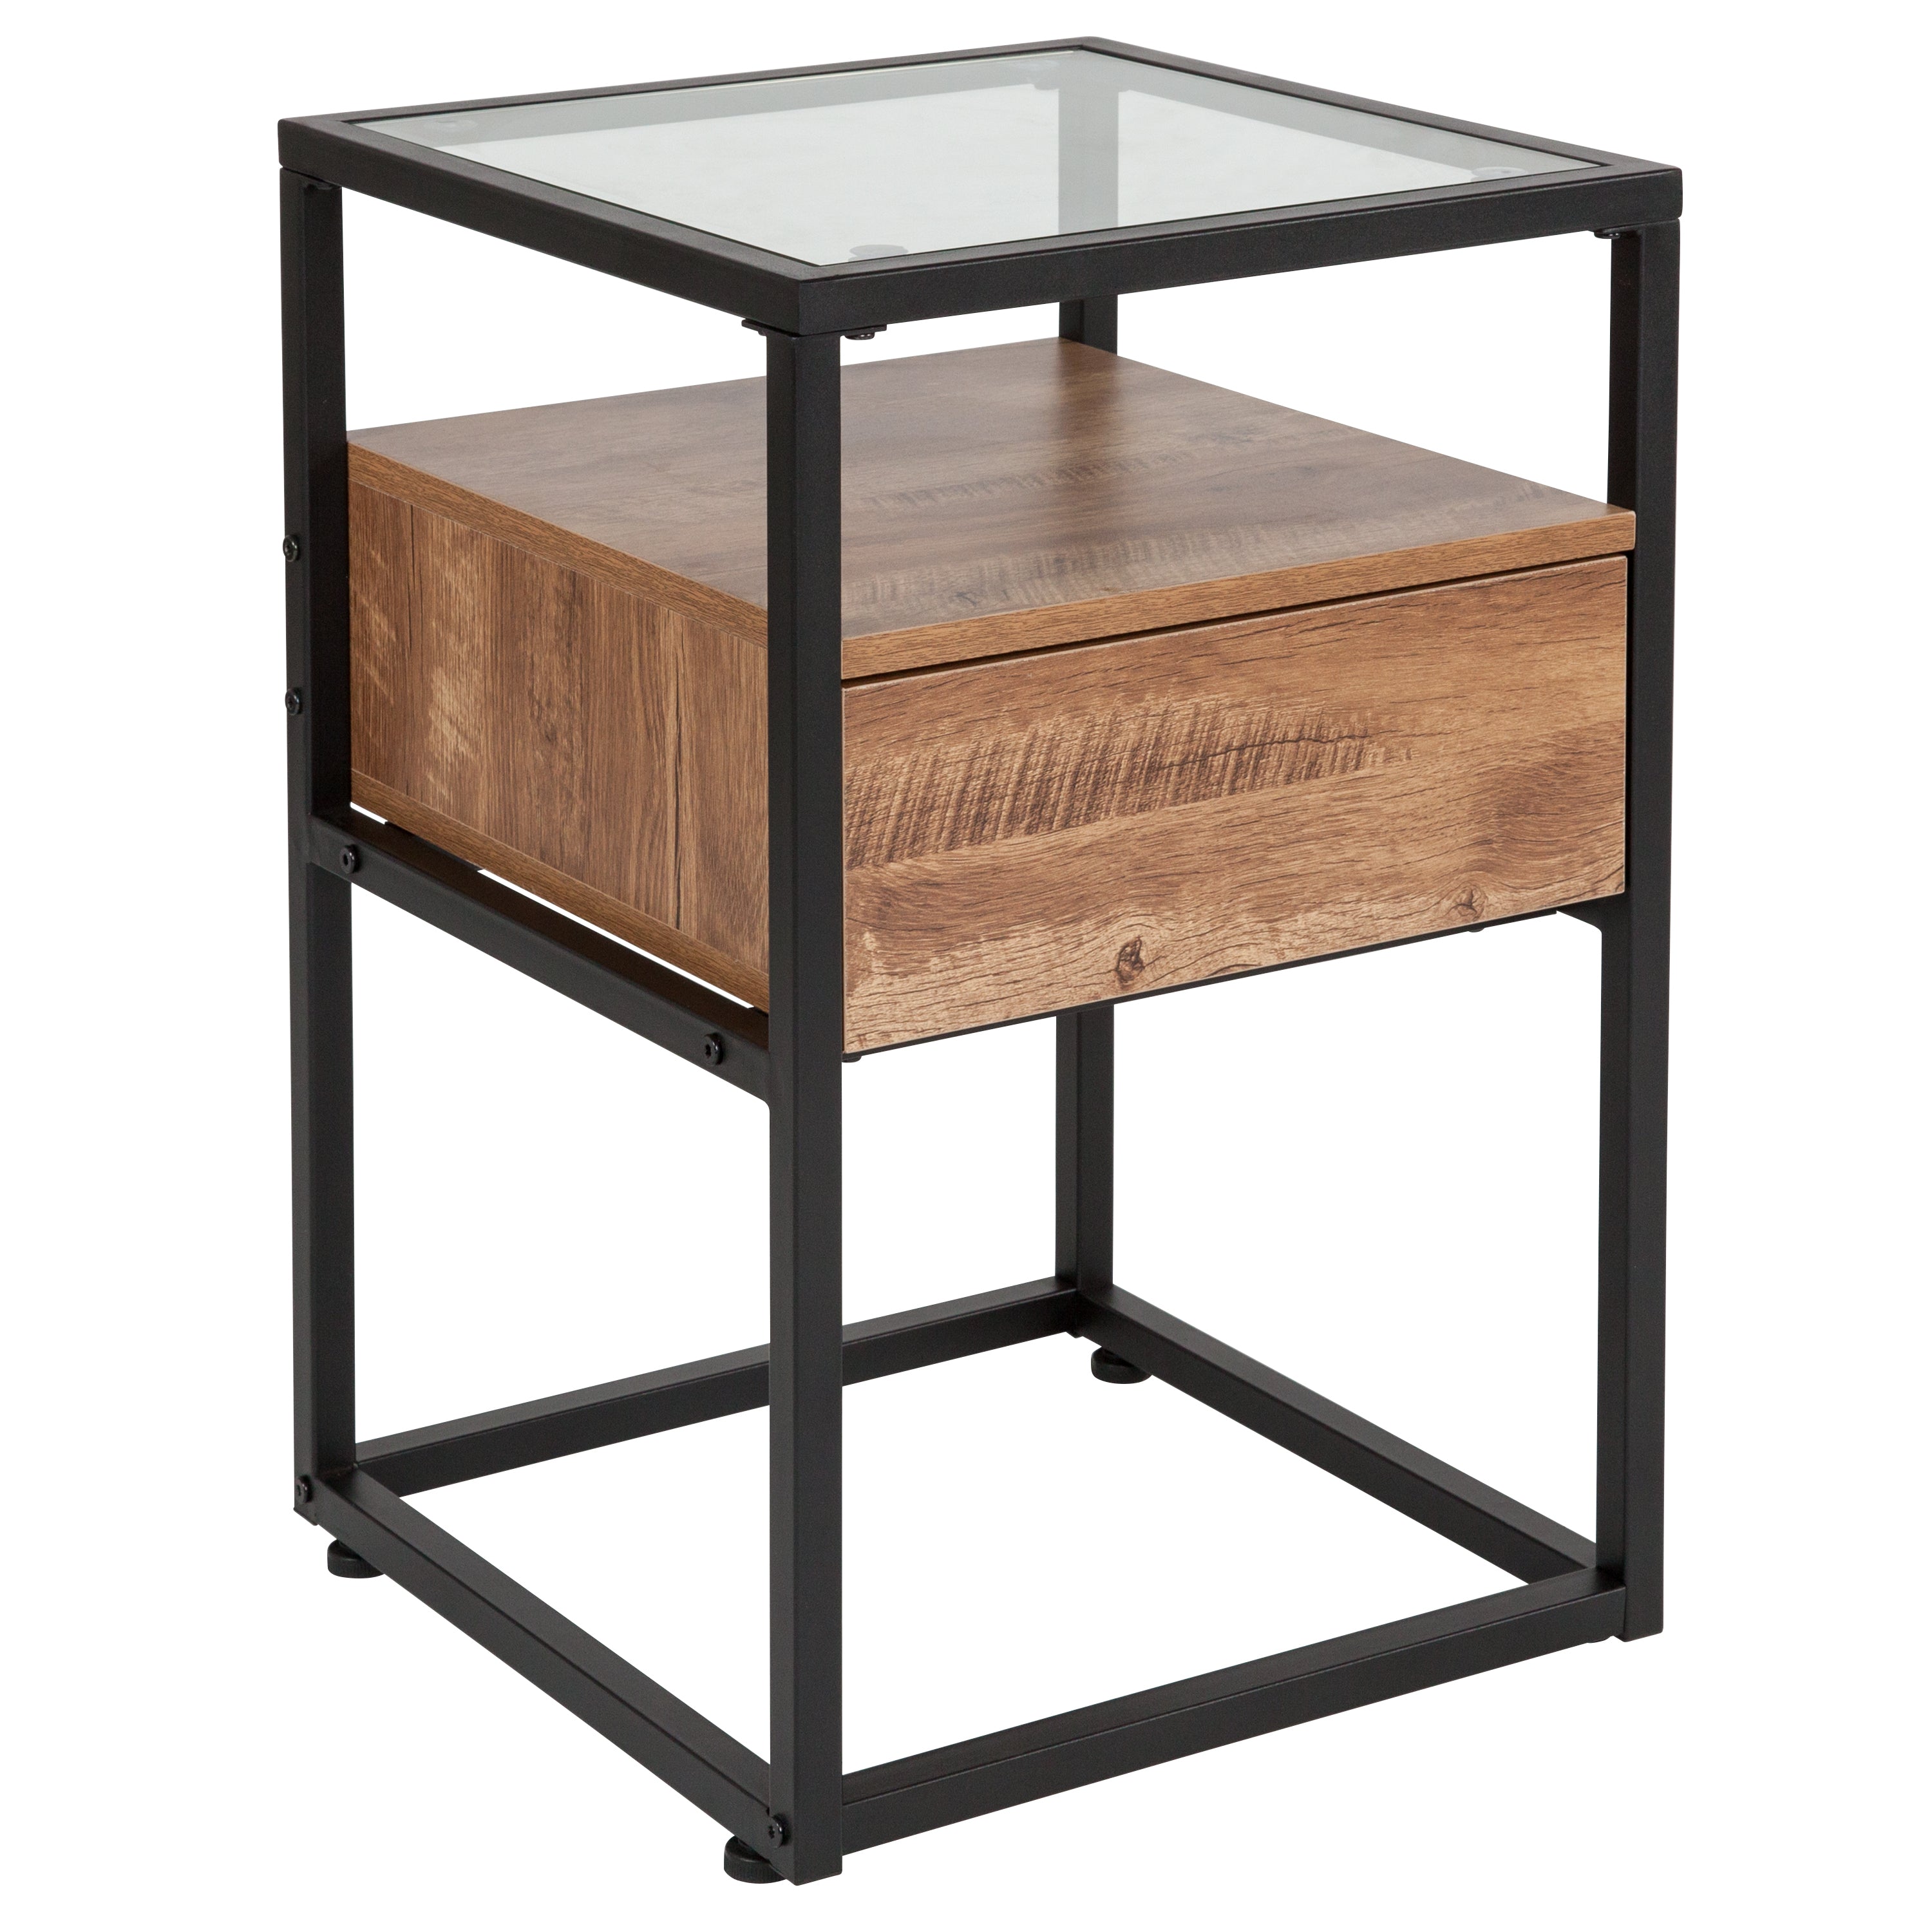 Cumberland Collection Glass Coffee Table with Drawer and Shelf in Wood Grain Finish-Residential Tables-Flash Furniture-Wall2Wall Furnishings